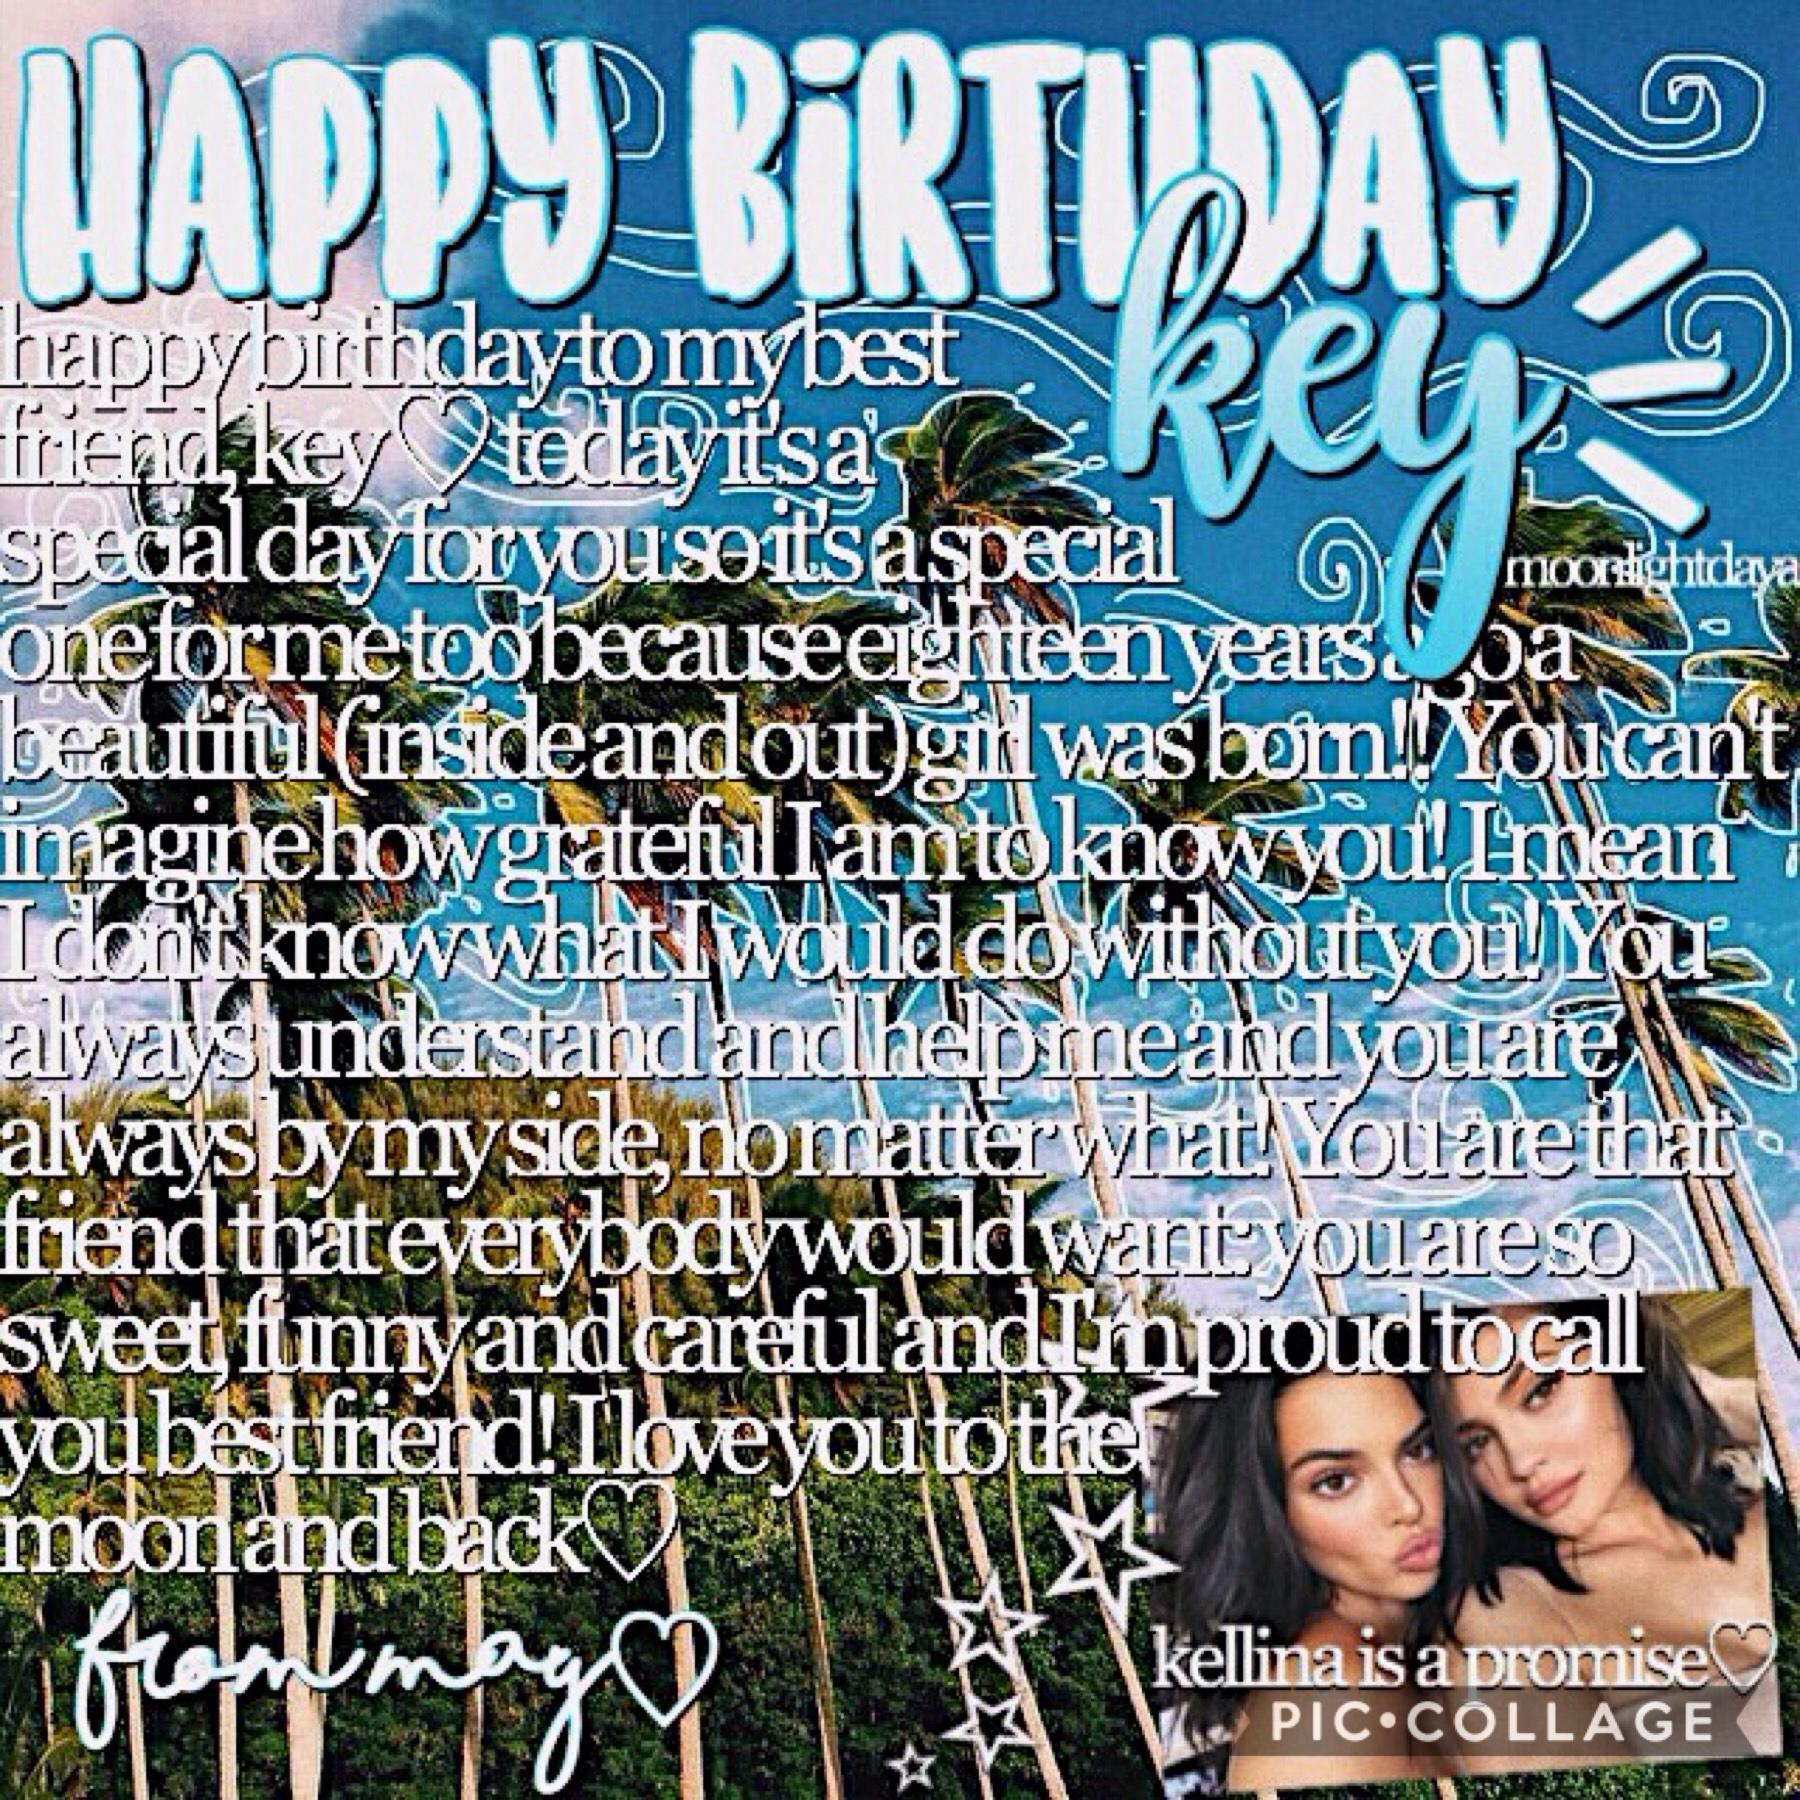 happy birthday to KELLINA, my best friend💖🦄 i love you so freaking much💘you're the Kendall to my kylie🤞🏼 I can't imagine about a life without you, my best friend🌊💕🐻